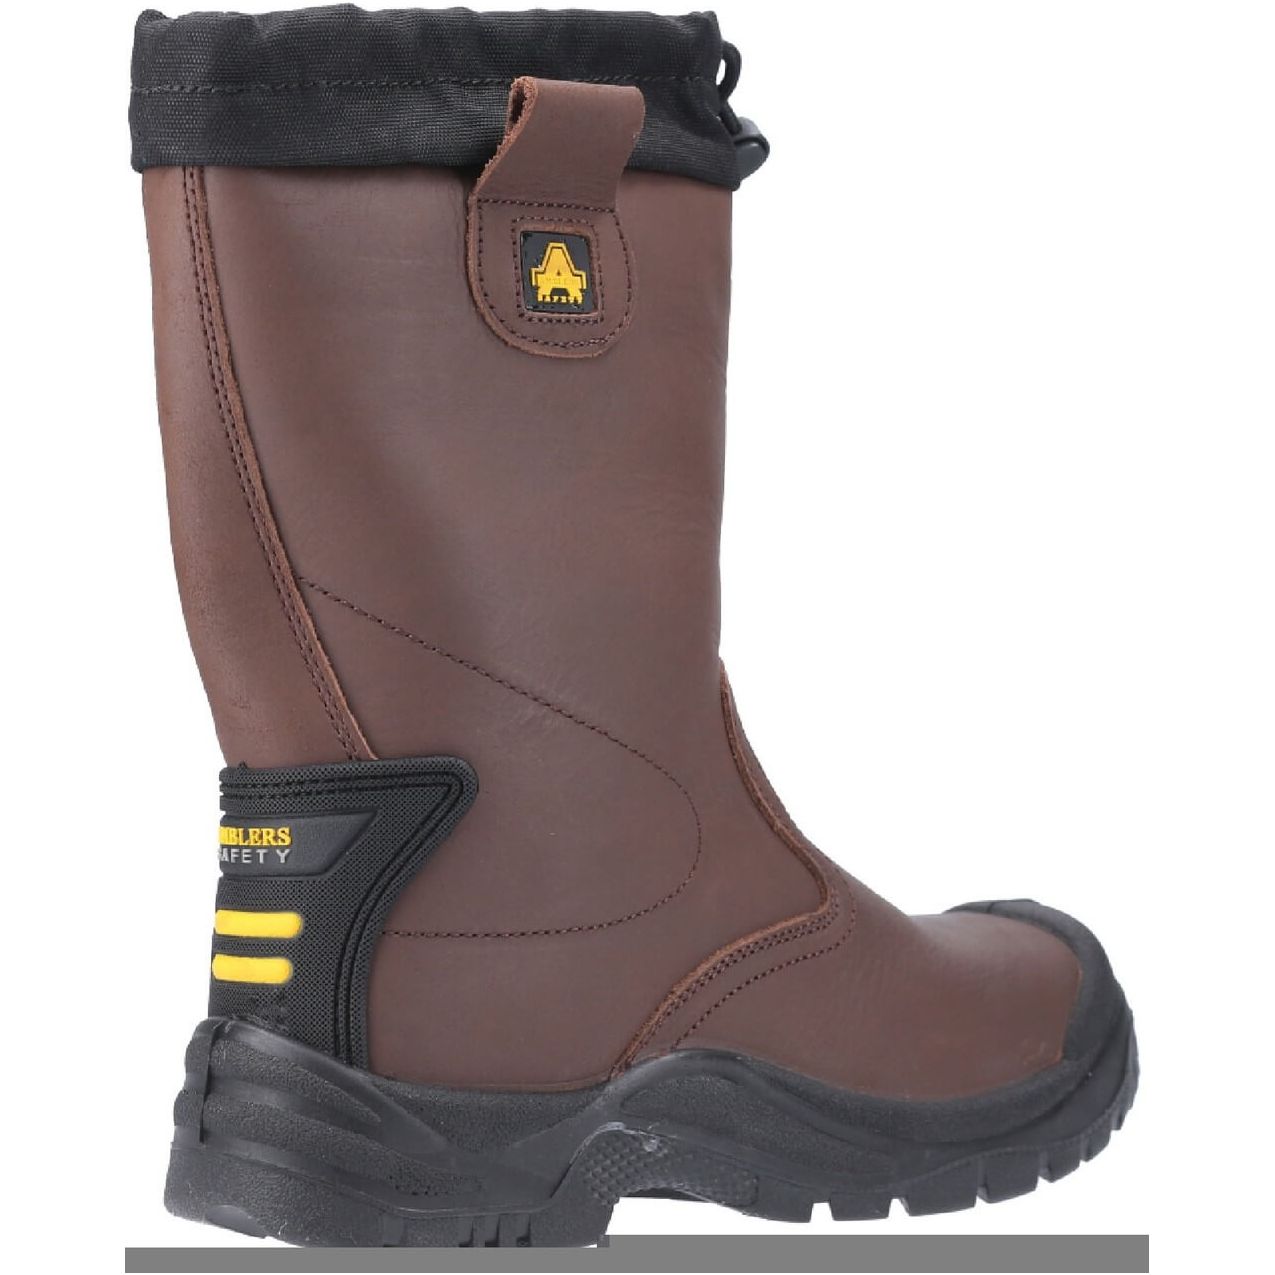 Amblers Fs245 Antistatic Safety Rigger Boots - Womens - Sale